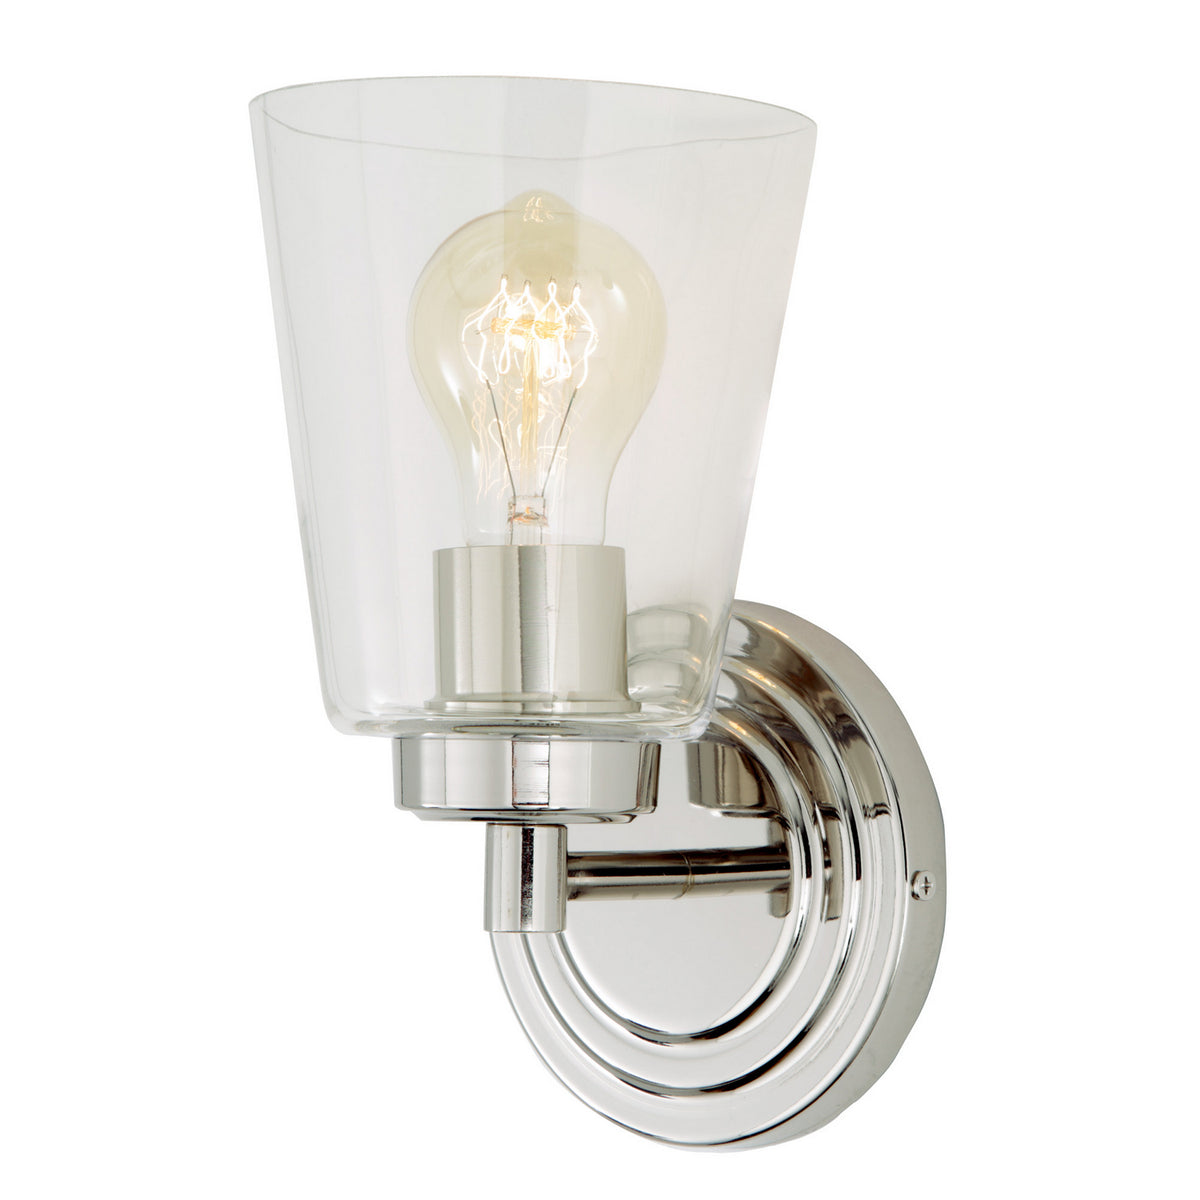 JVI Designs - 461-15 - One Light Wall Sconce - Wilshire - Polished Nickel